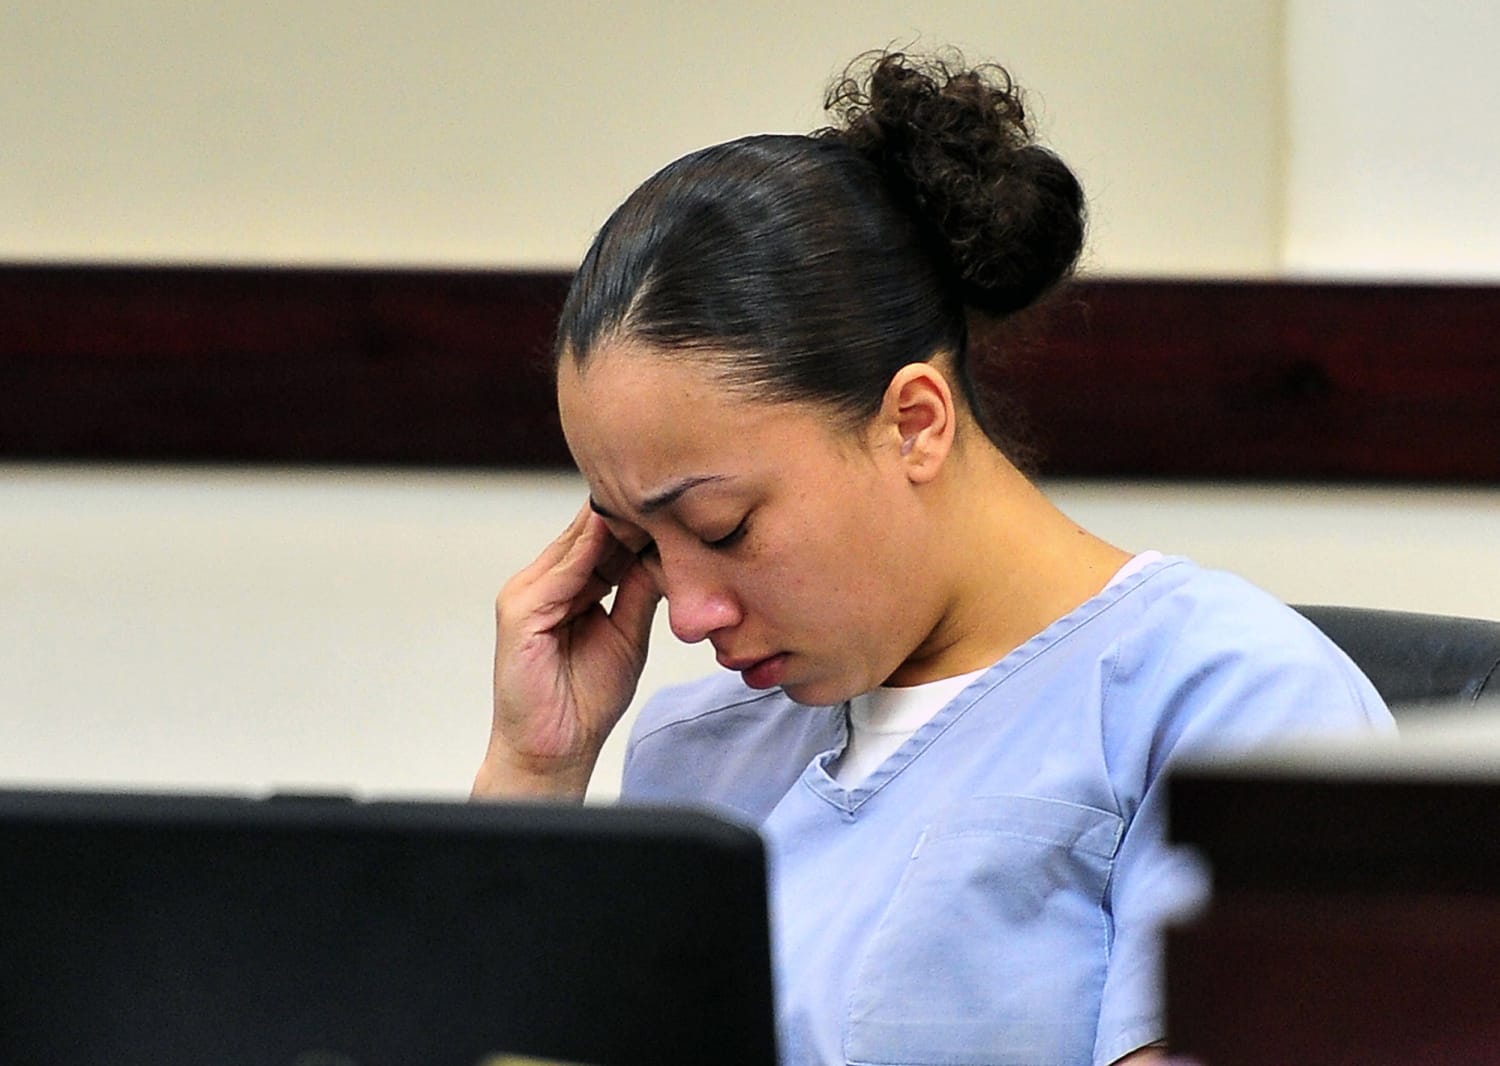 Asian Sex Slave Girls - Who is Cyntoia Brown? Celebrities rally behind teen sentenced to life in  prison